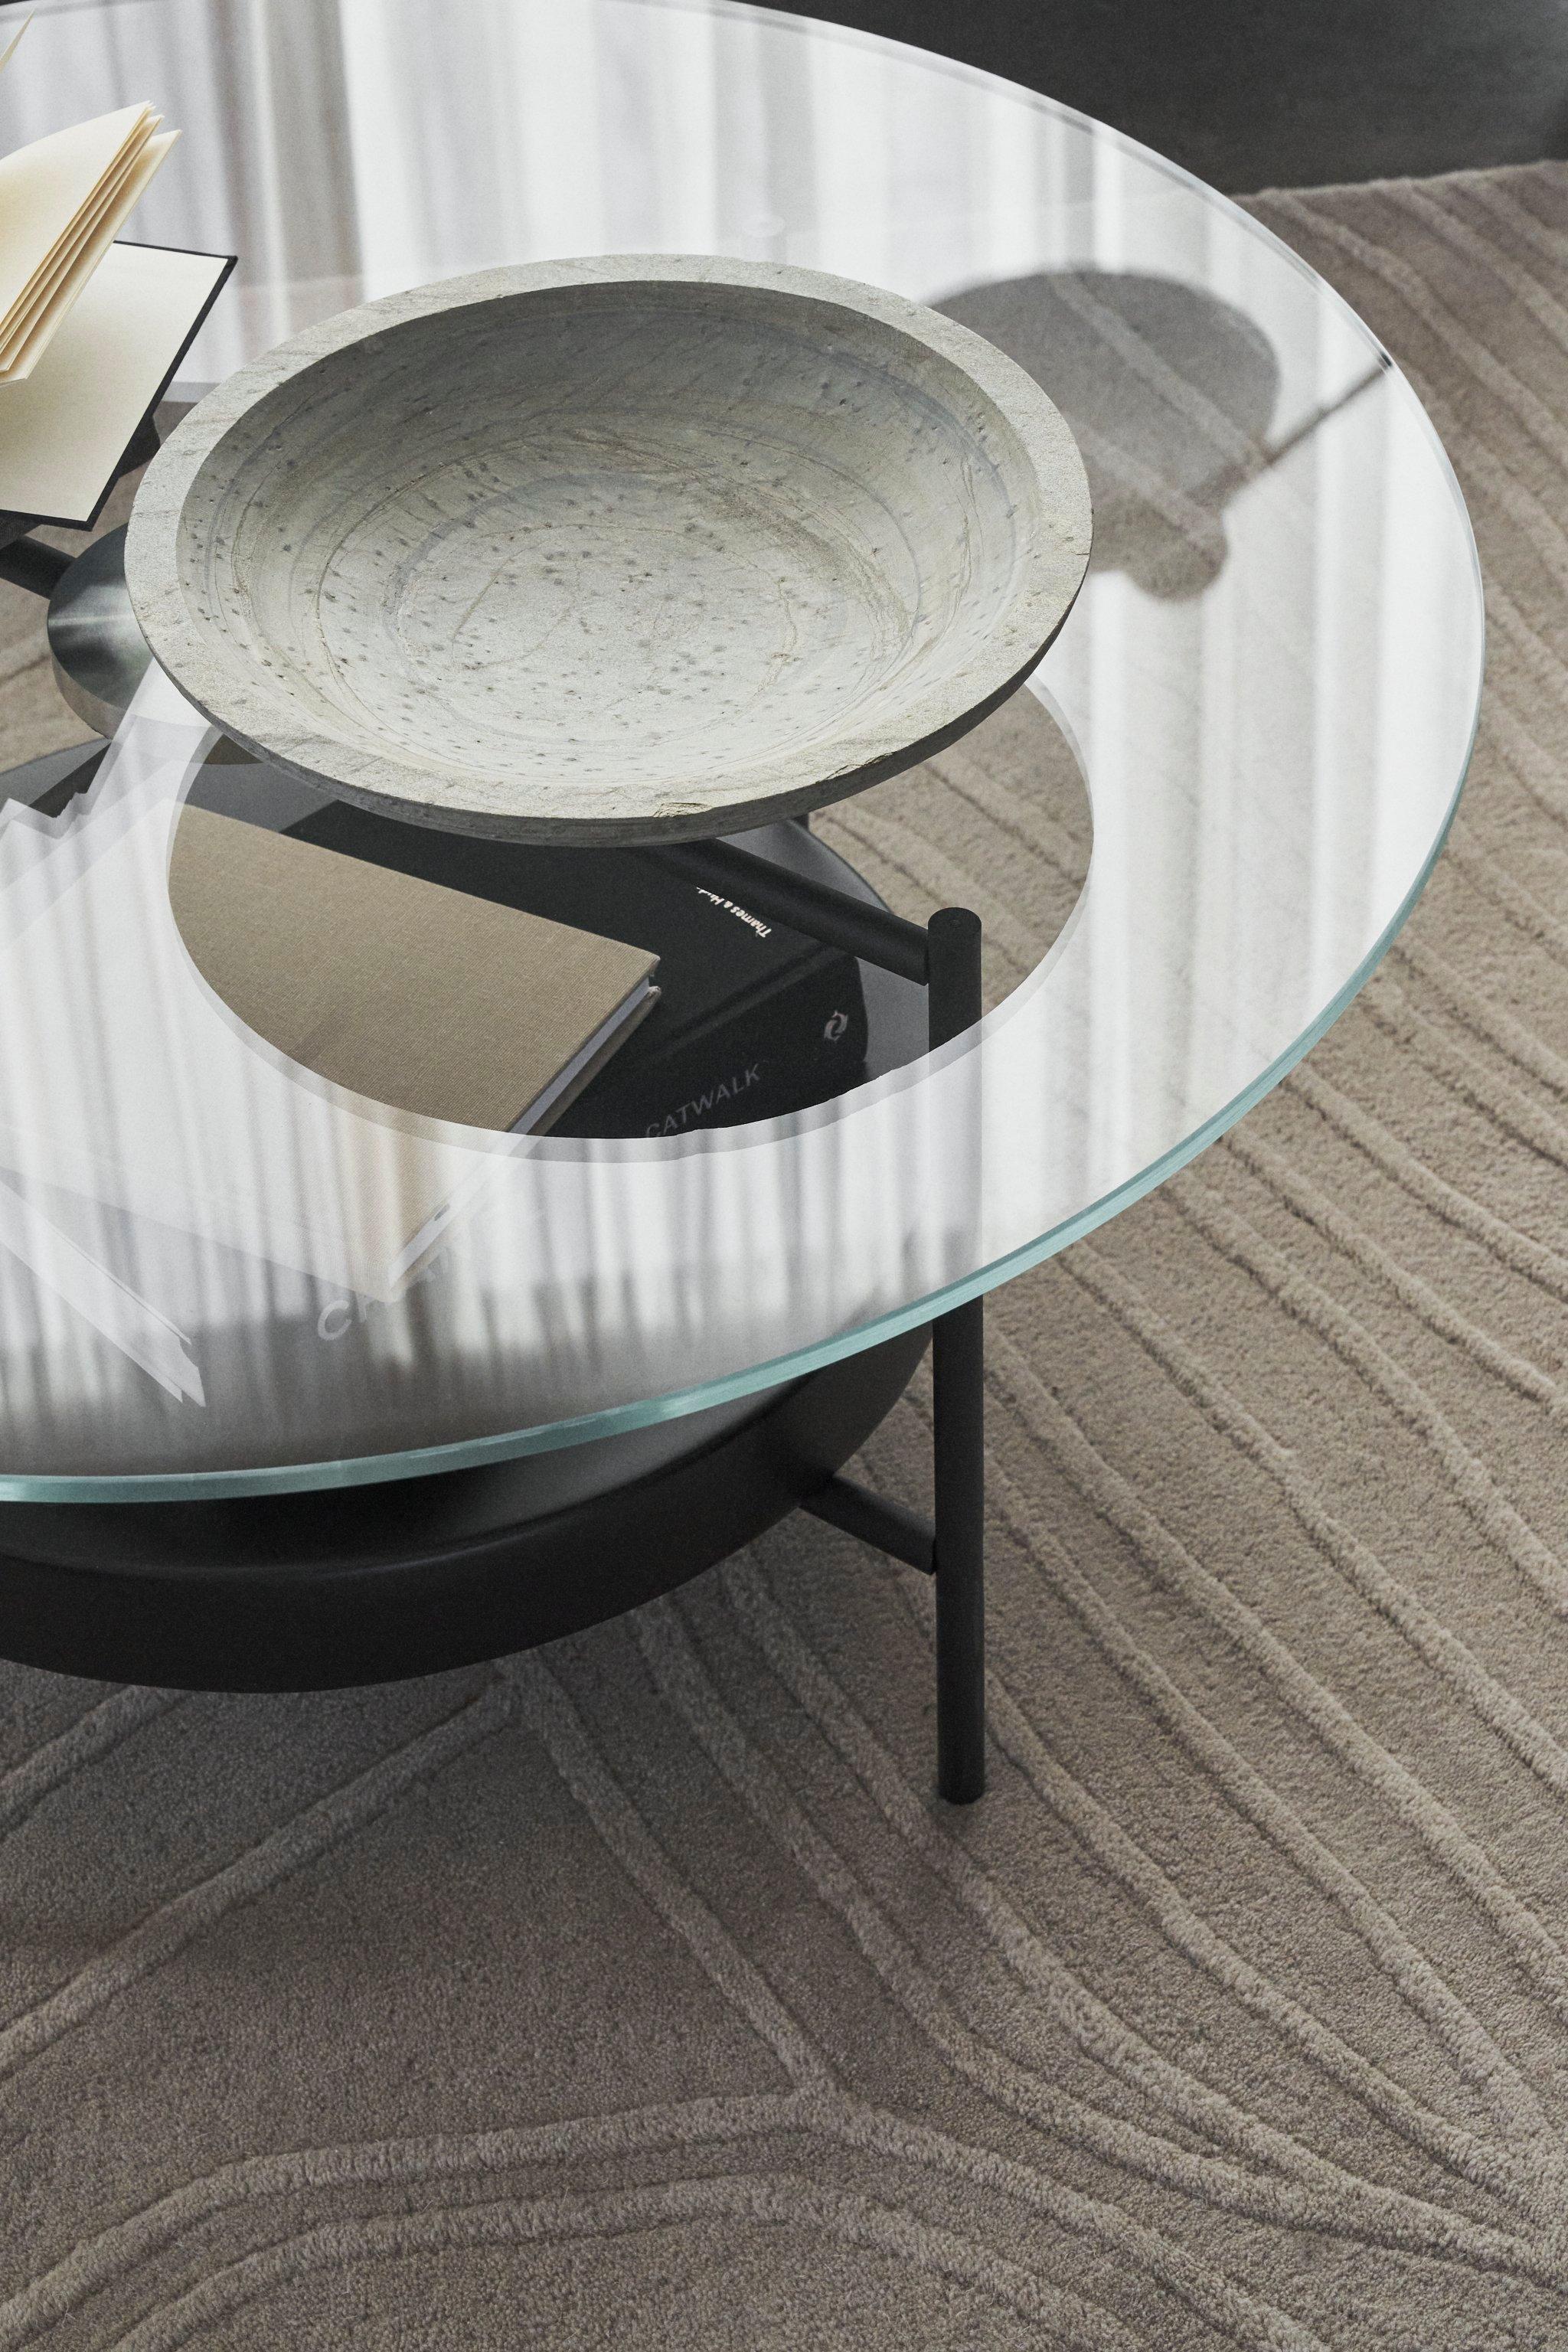 Modern glass-top coffee table with a decorative bowl and books on a textured rug.